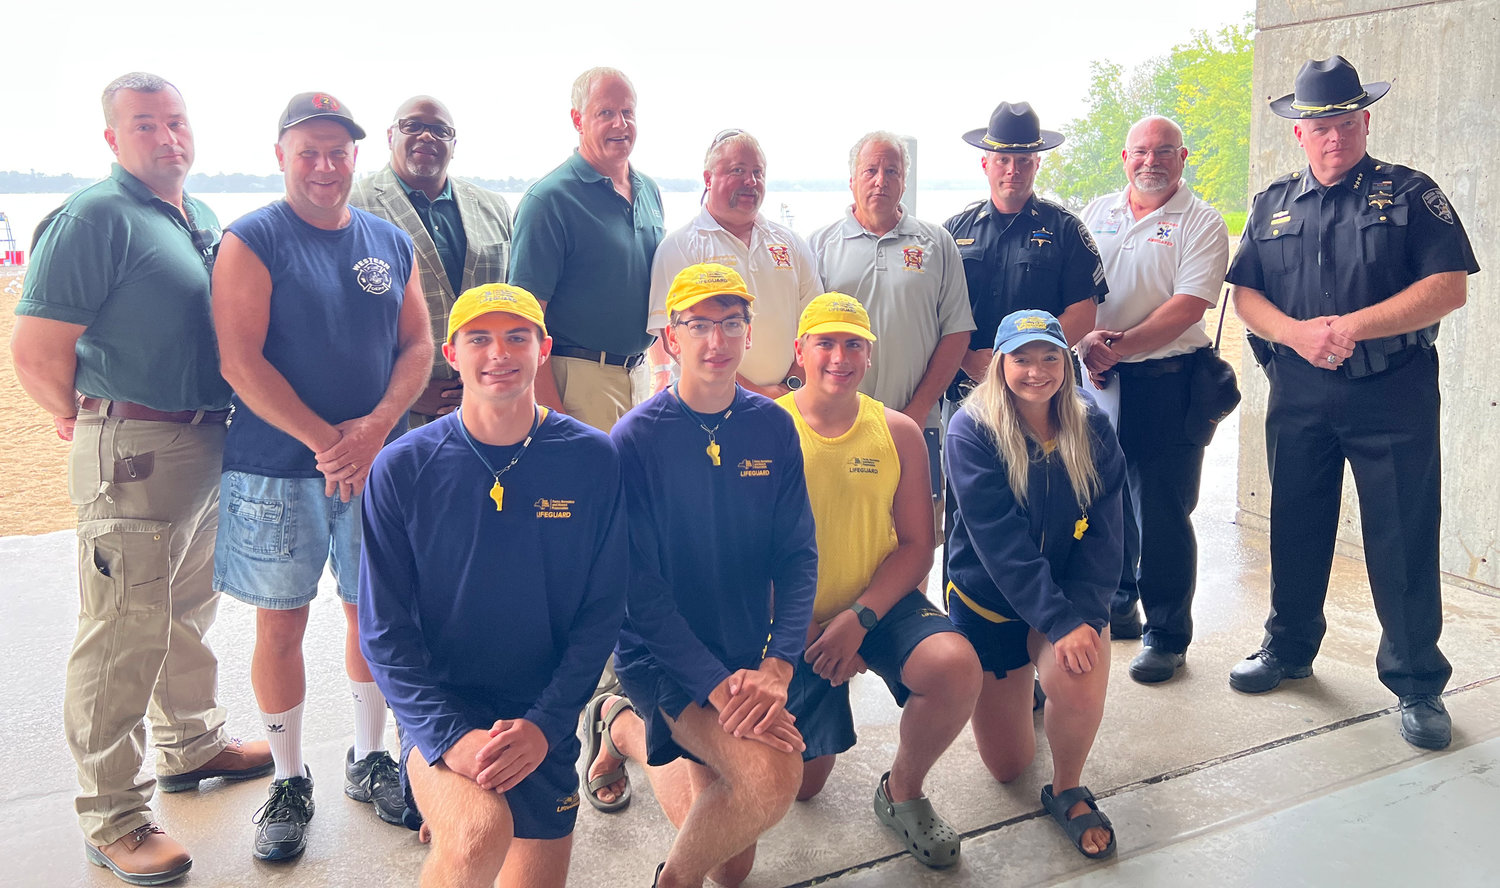 Lake Delta lifeguards, Western firefighters and AmCare Ambulance personnel were honored by Oneida County Sheriff Robert M. Maciol, right, for their efforts to save the life of an unresponsive, 11-month-old baby at the state park on July 5. All those involved were honored Monday morning.